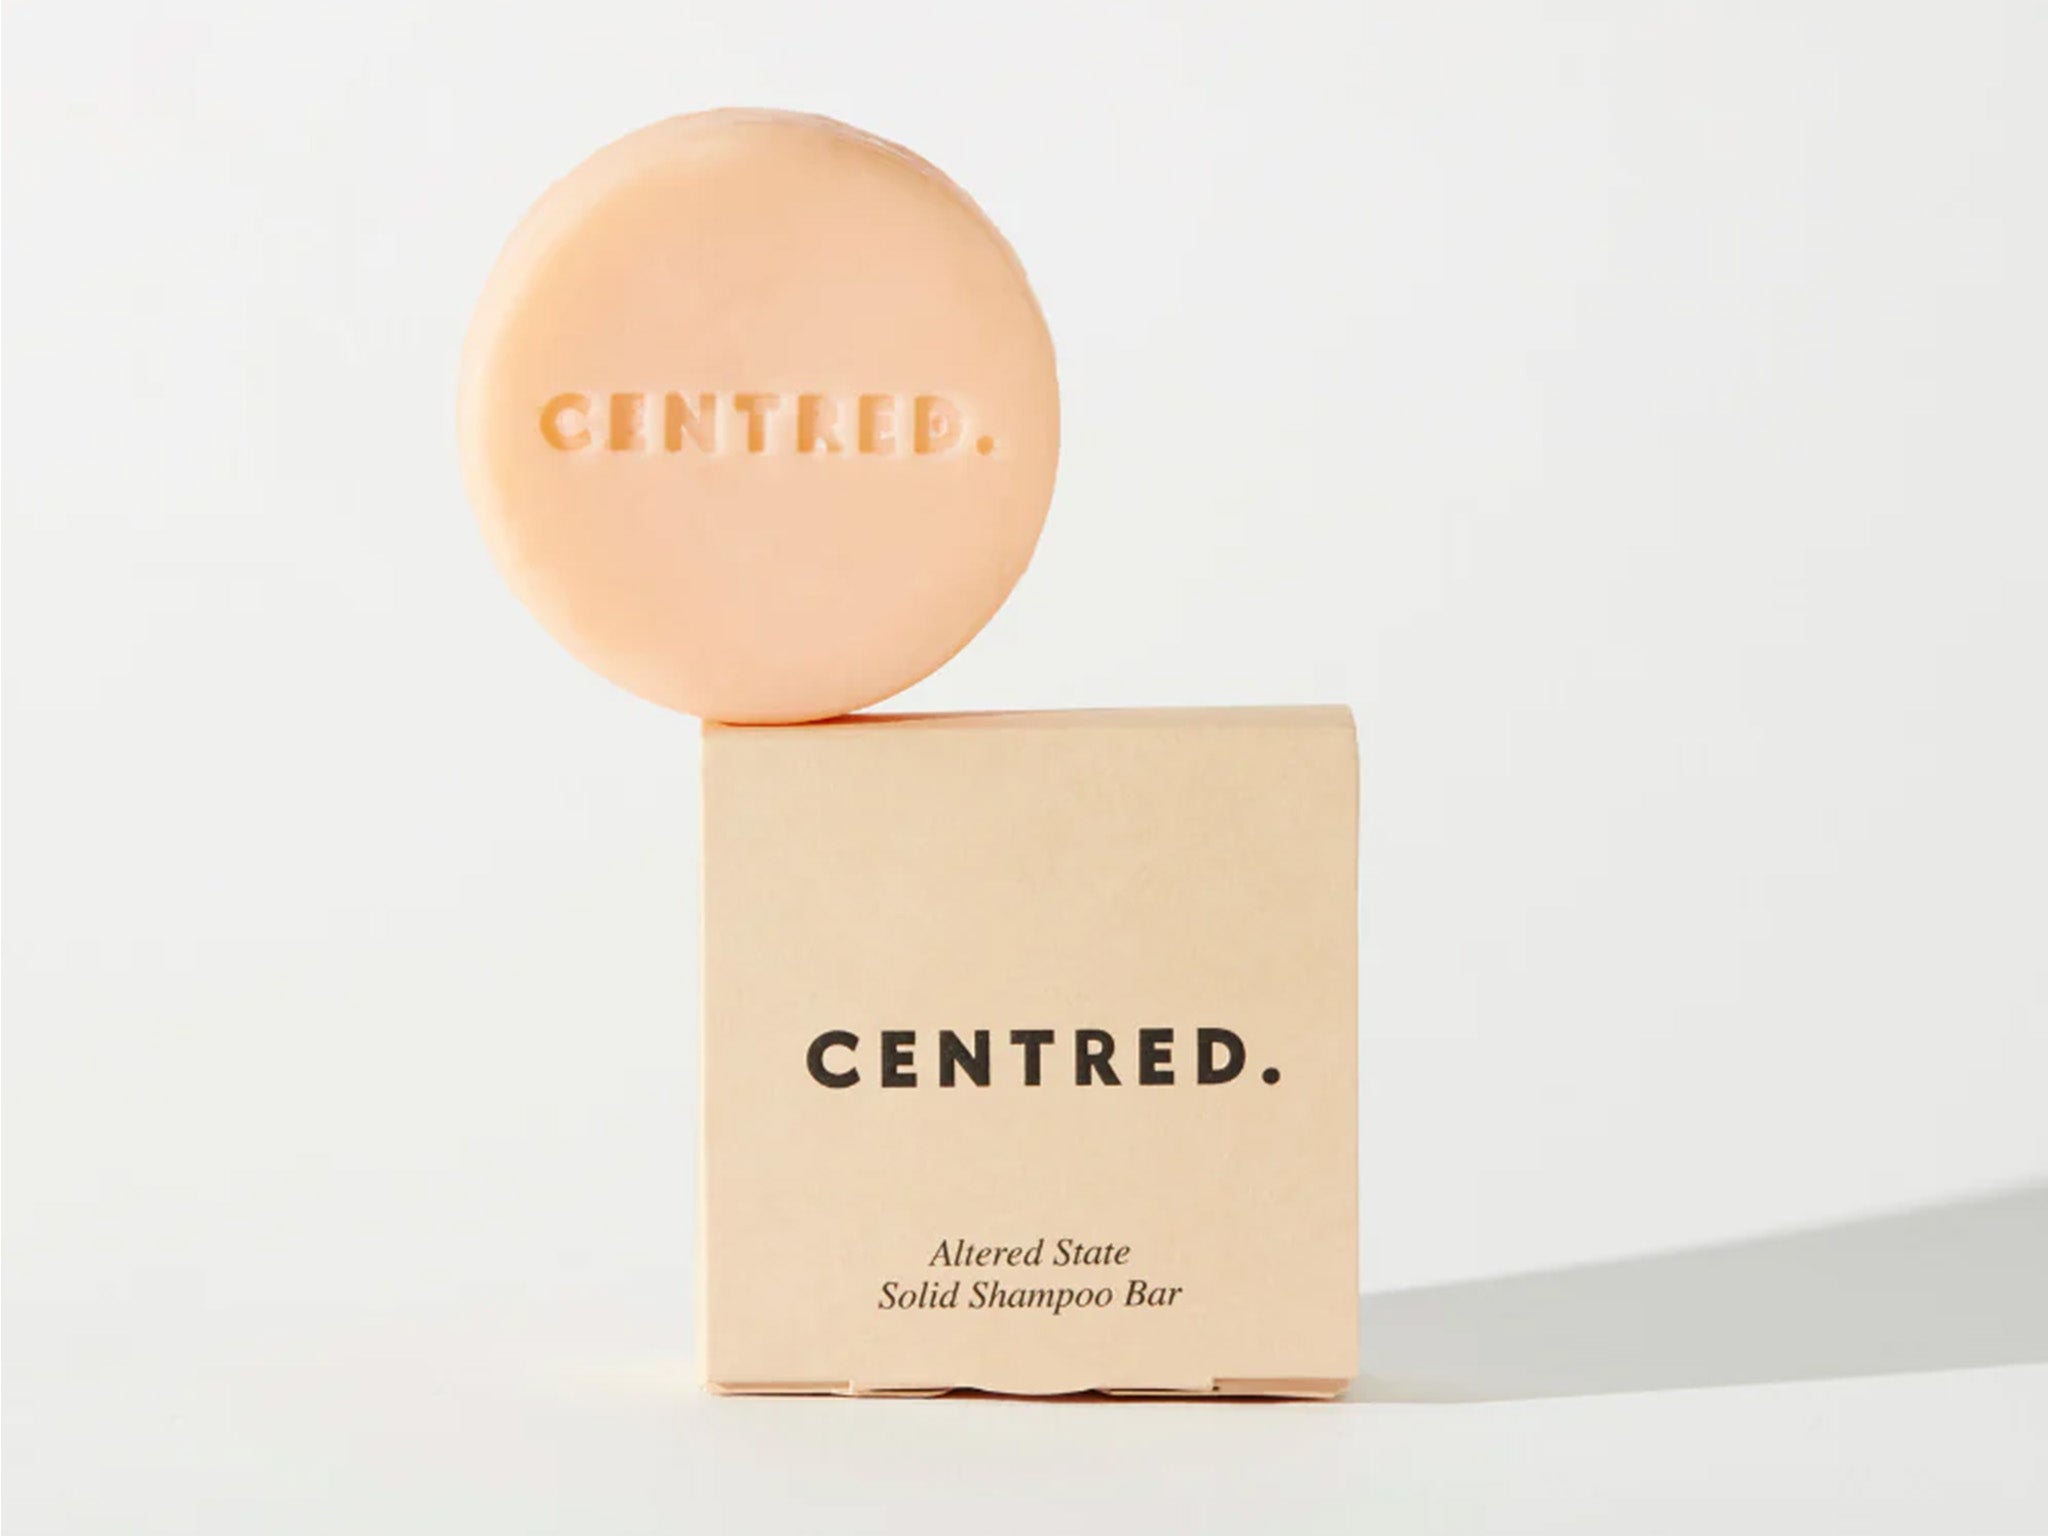 Centered altered state solid shampoo bar 